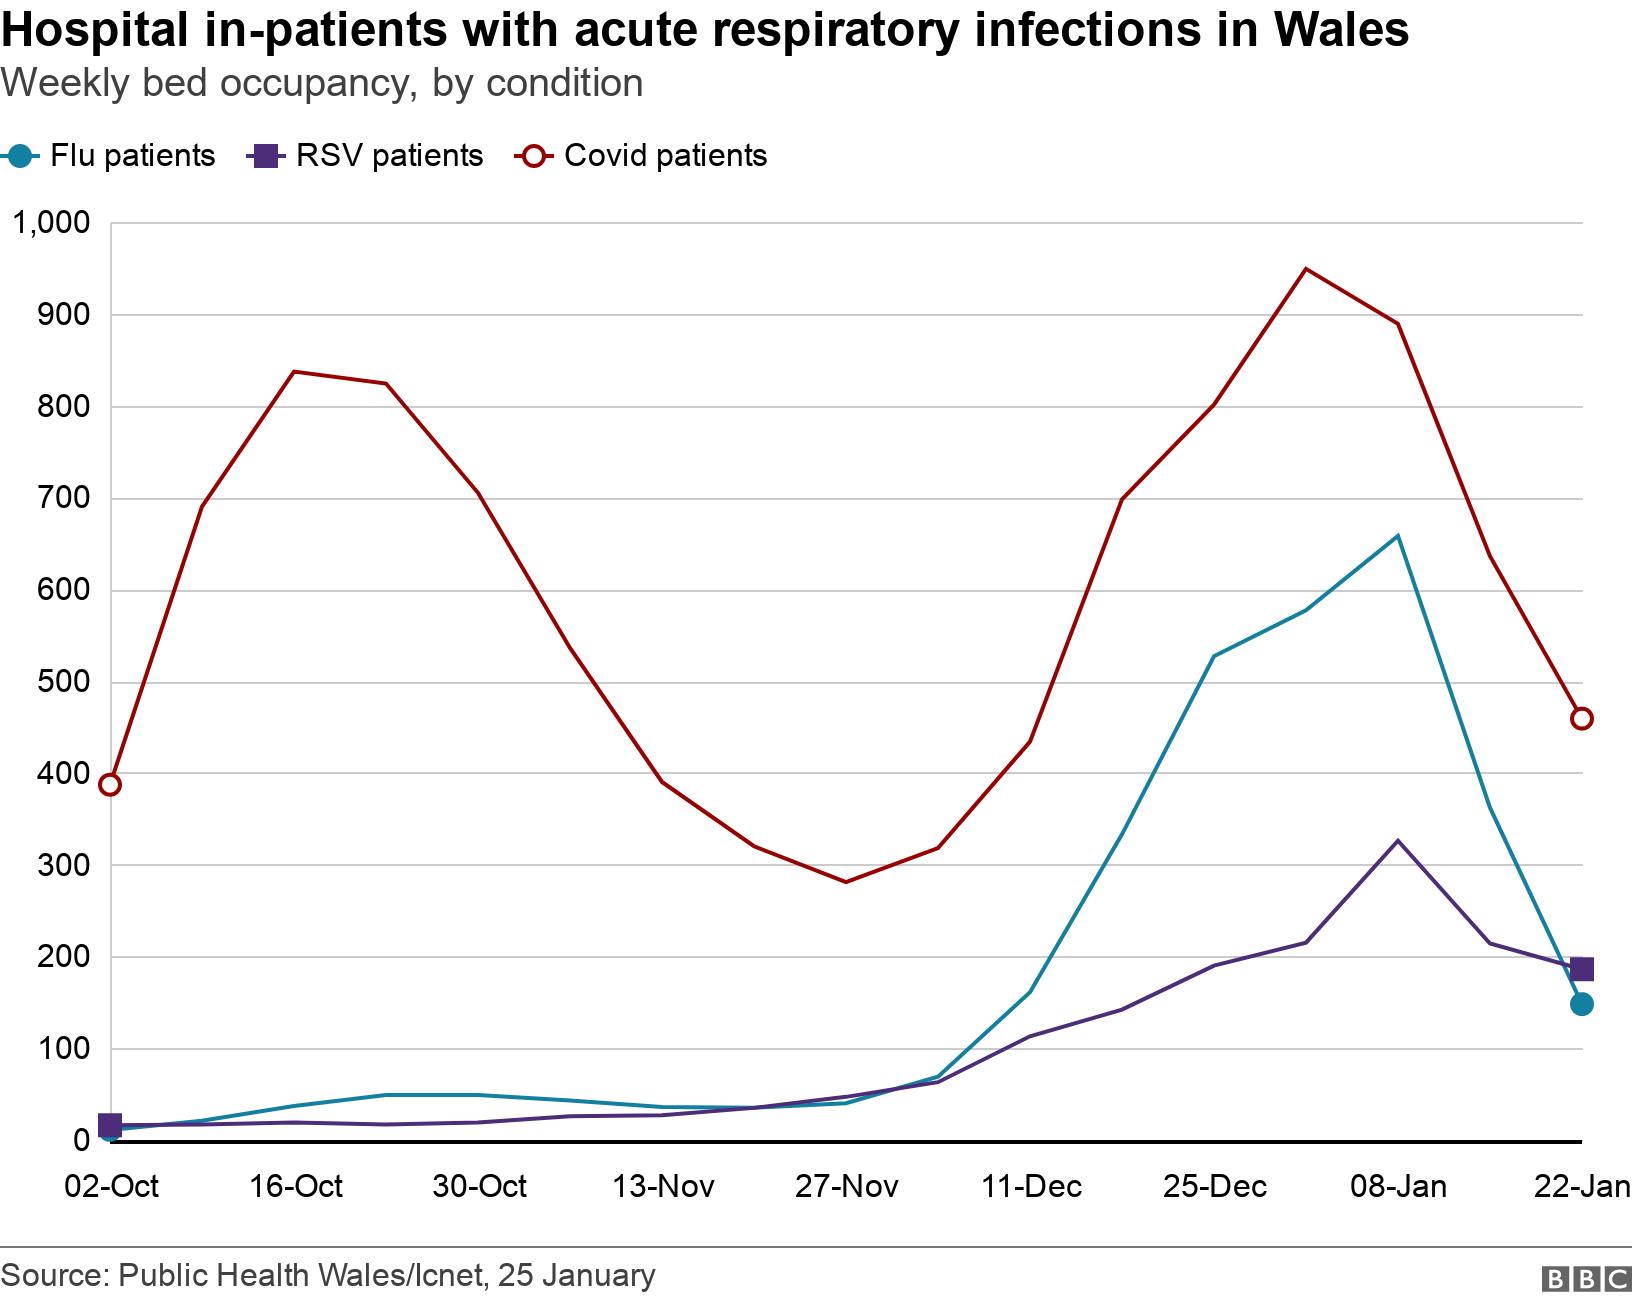 Hospital in-patients with acute respiratory infections in Wales. Weekly bed occupancy, by condition.  .